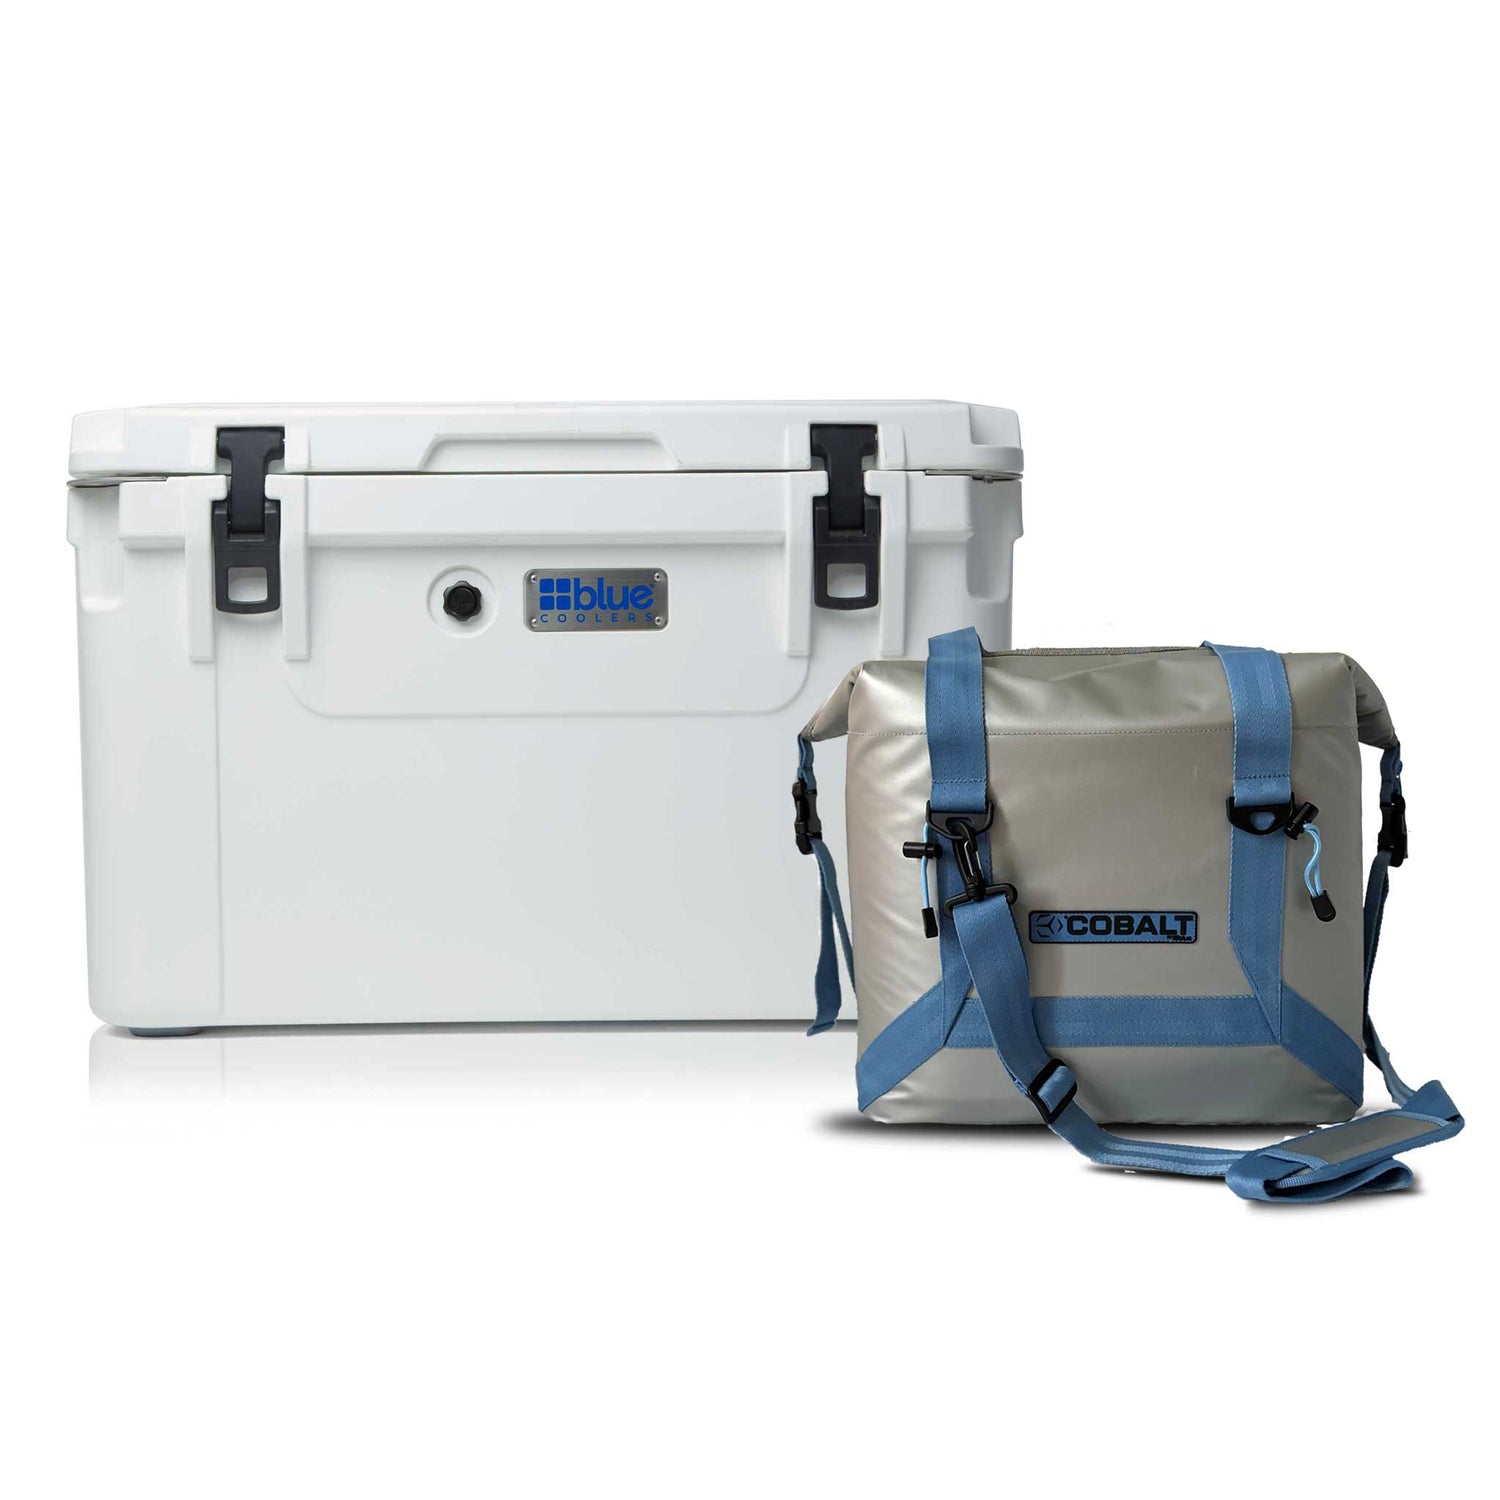 Double the Chill Side Tote Bundle - Roto Molded Cooler + Soft Sided Cooler